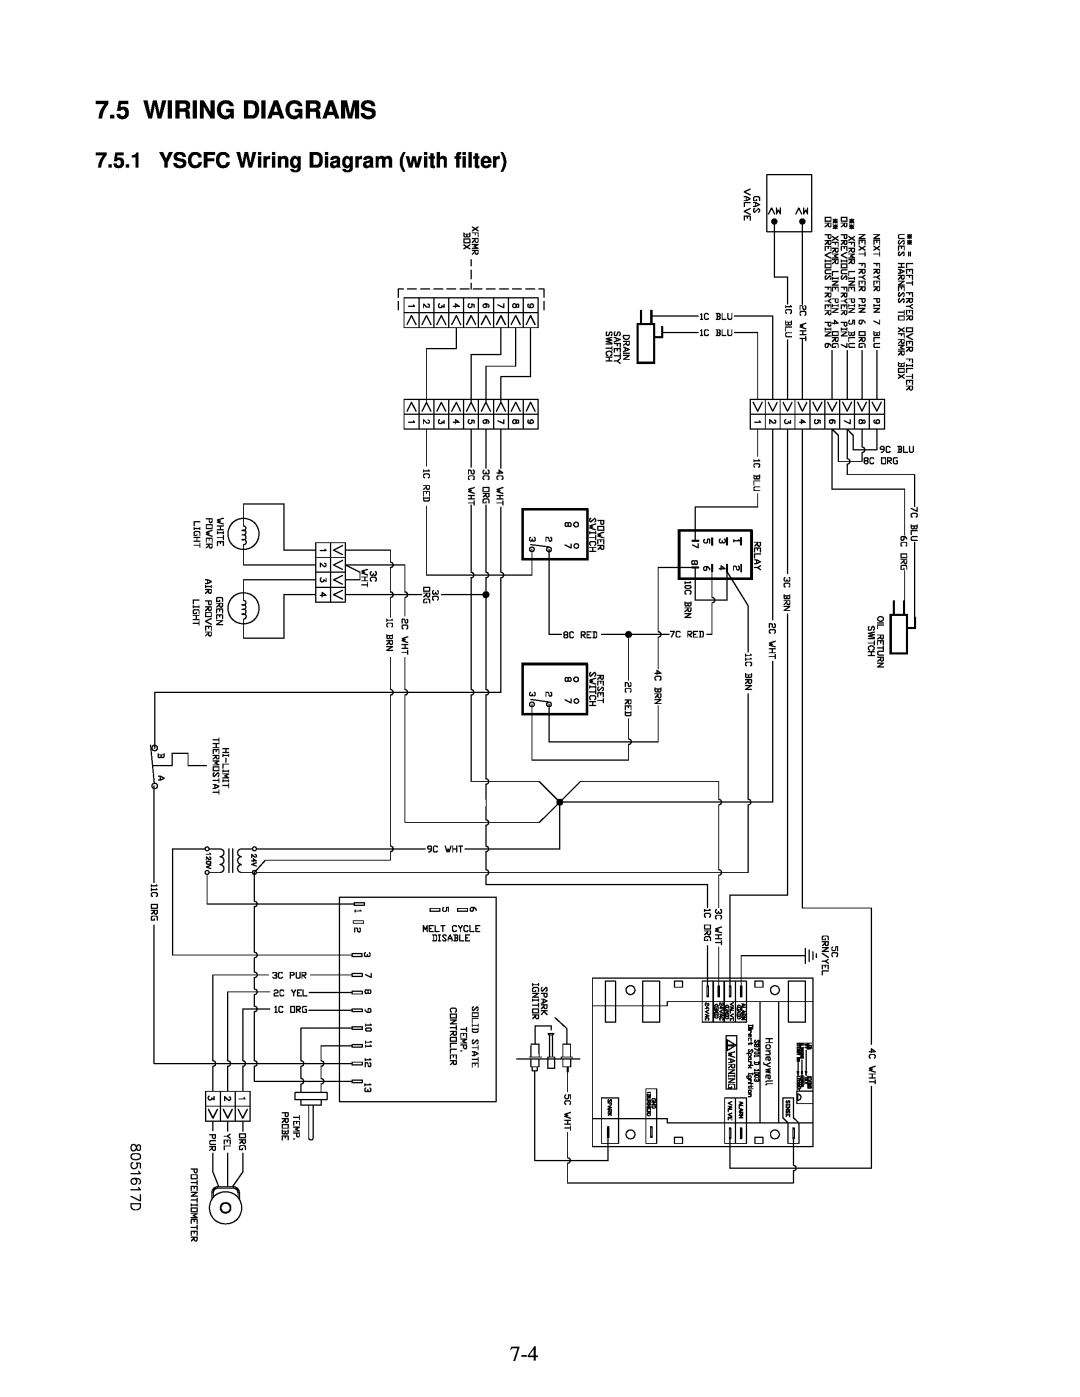 Frymaster YSCFC24 operation manual Wiring Diagrams, YSCFC Wiring Diagram with filter 